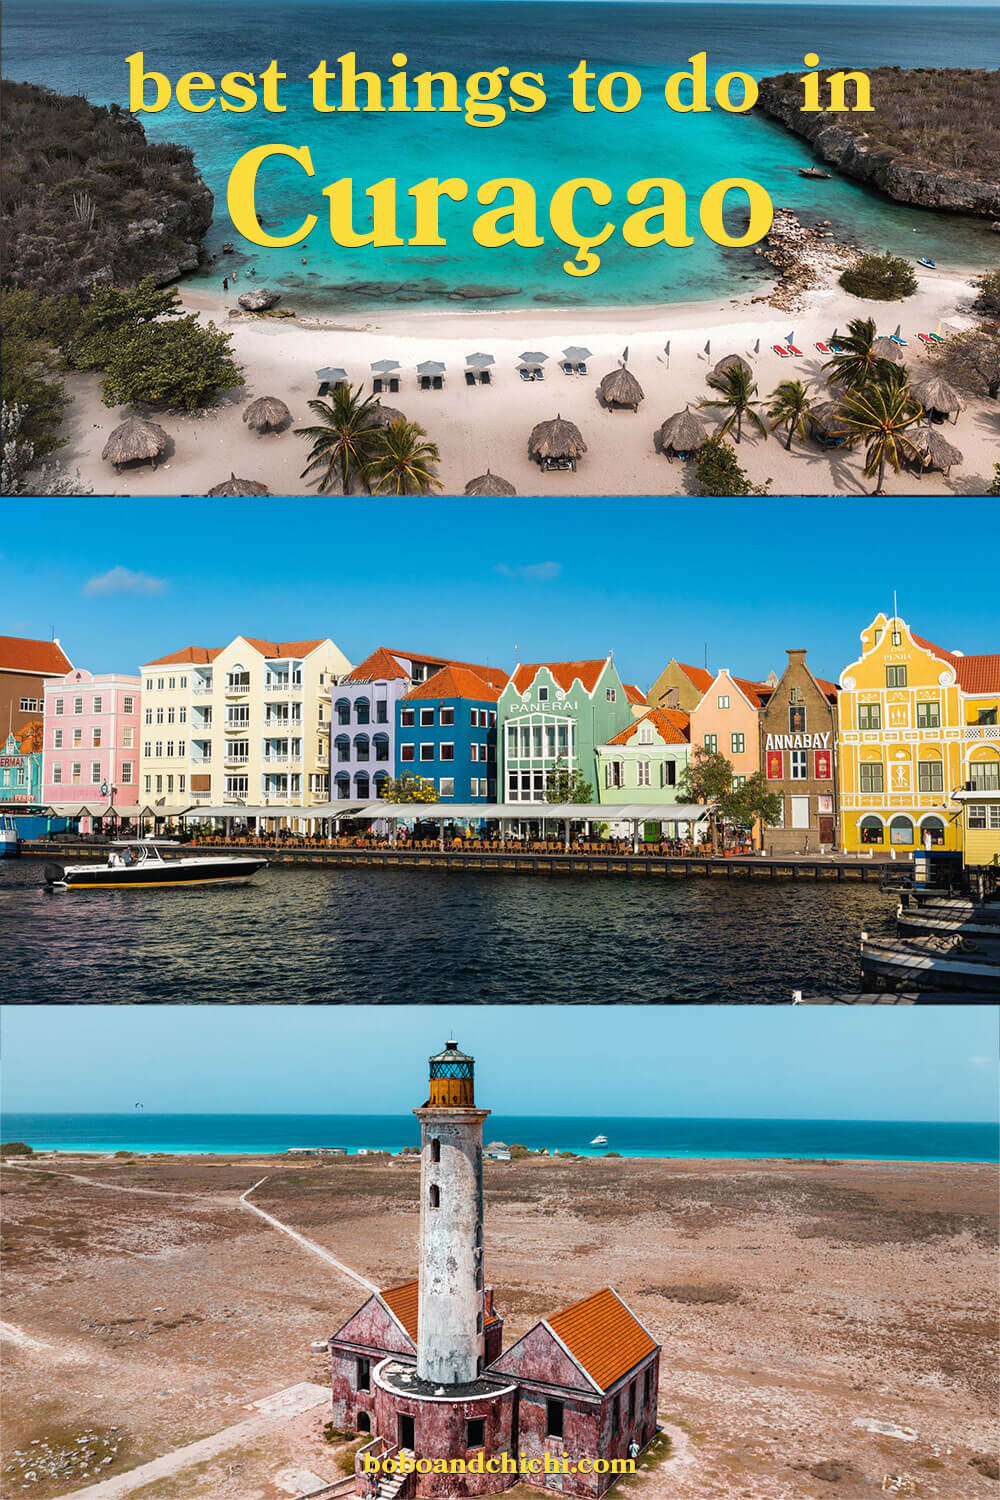 curacao-activities-and-attractions